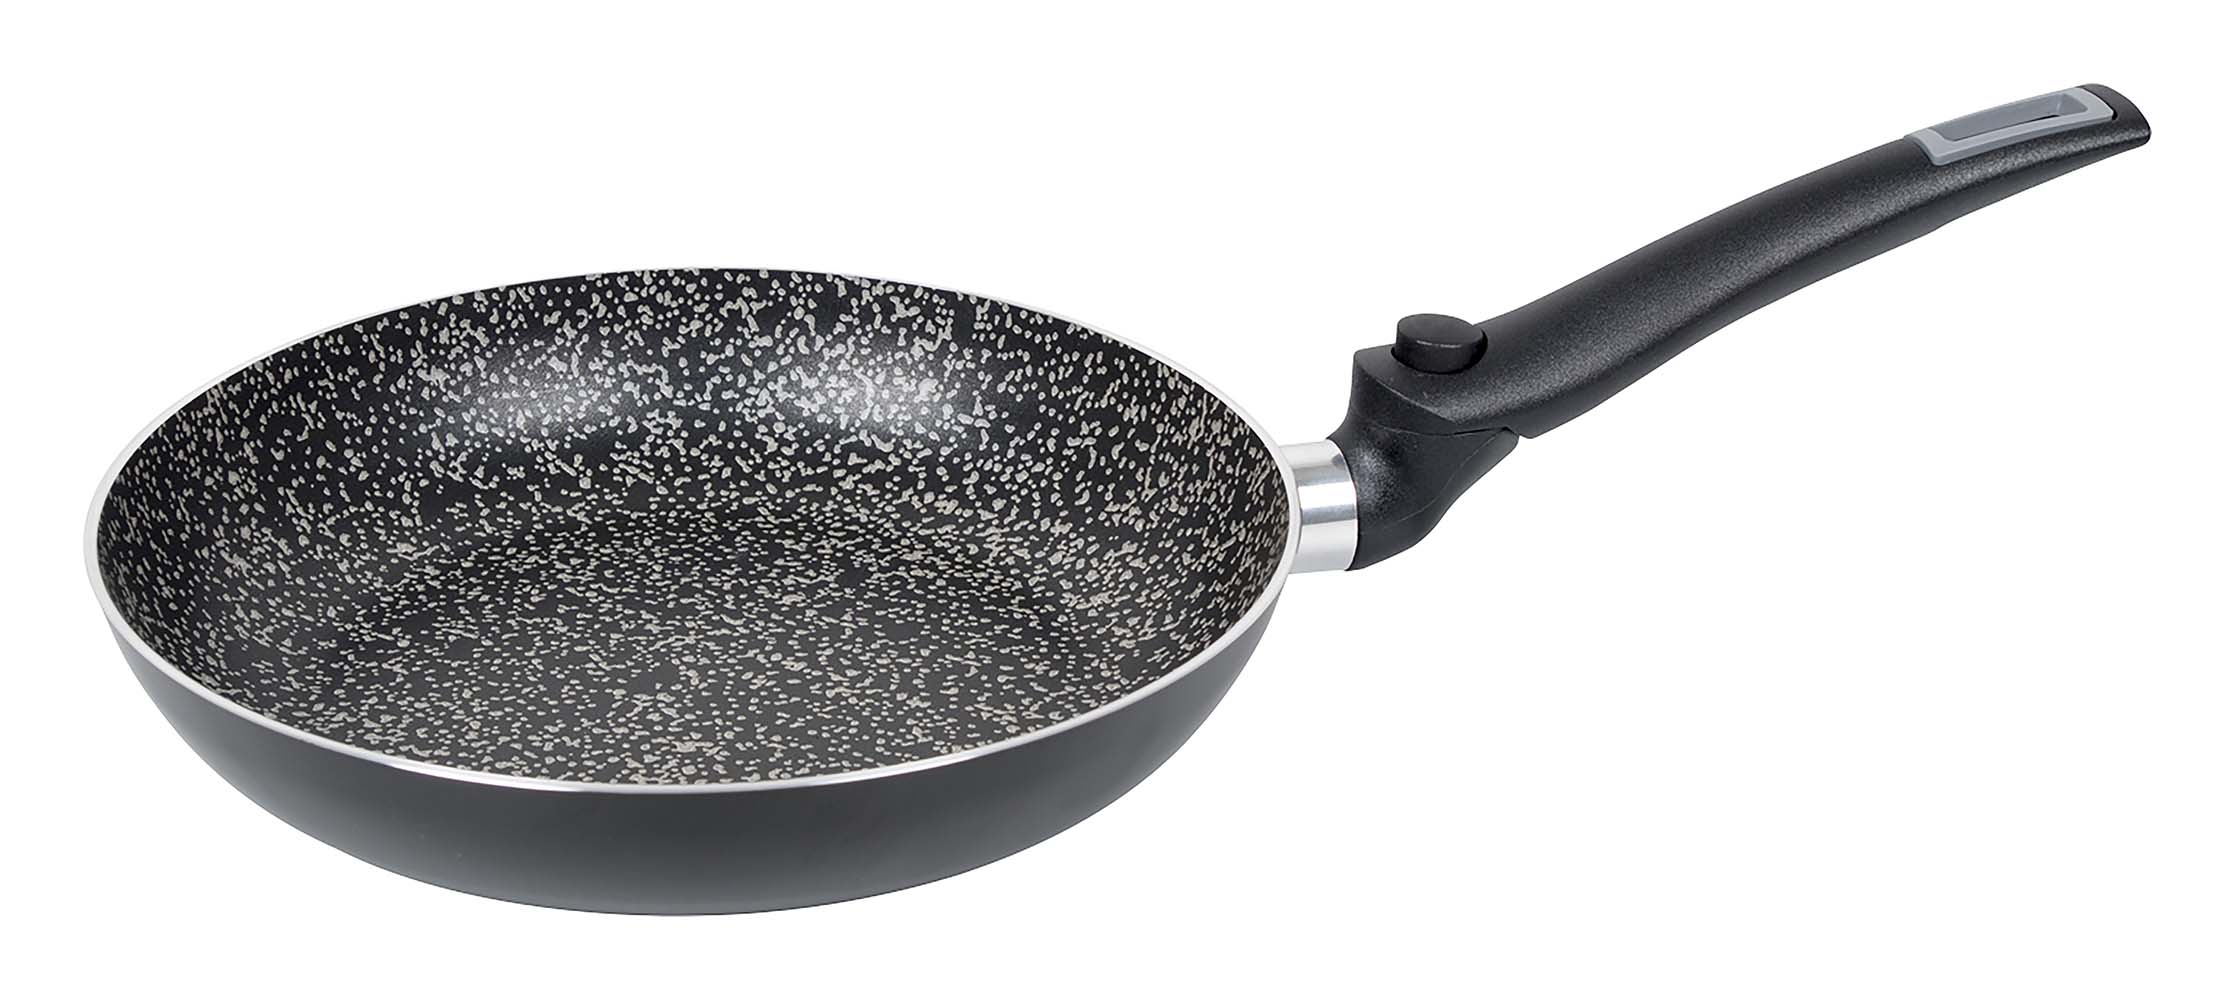 2304452 An aluminium frying pan with foldaway handle. Comes with a 5 layer Salus Stone coating and an anti-slip base. This pan has a foldaway handle and therefore makes good use of space and is easy to take with you. Dishwasher safe and suitable for heat sources gas, ceramic,electric and induction. Thickness: 2.5 millimetres.